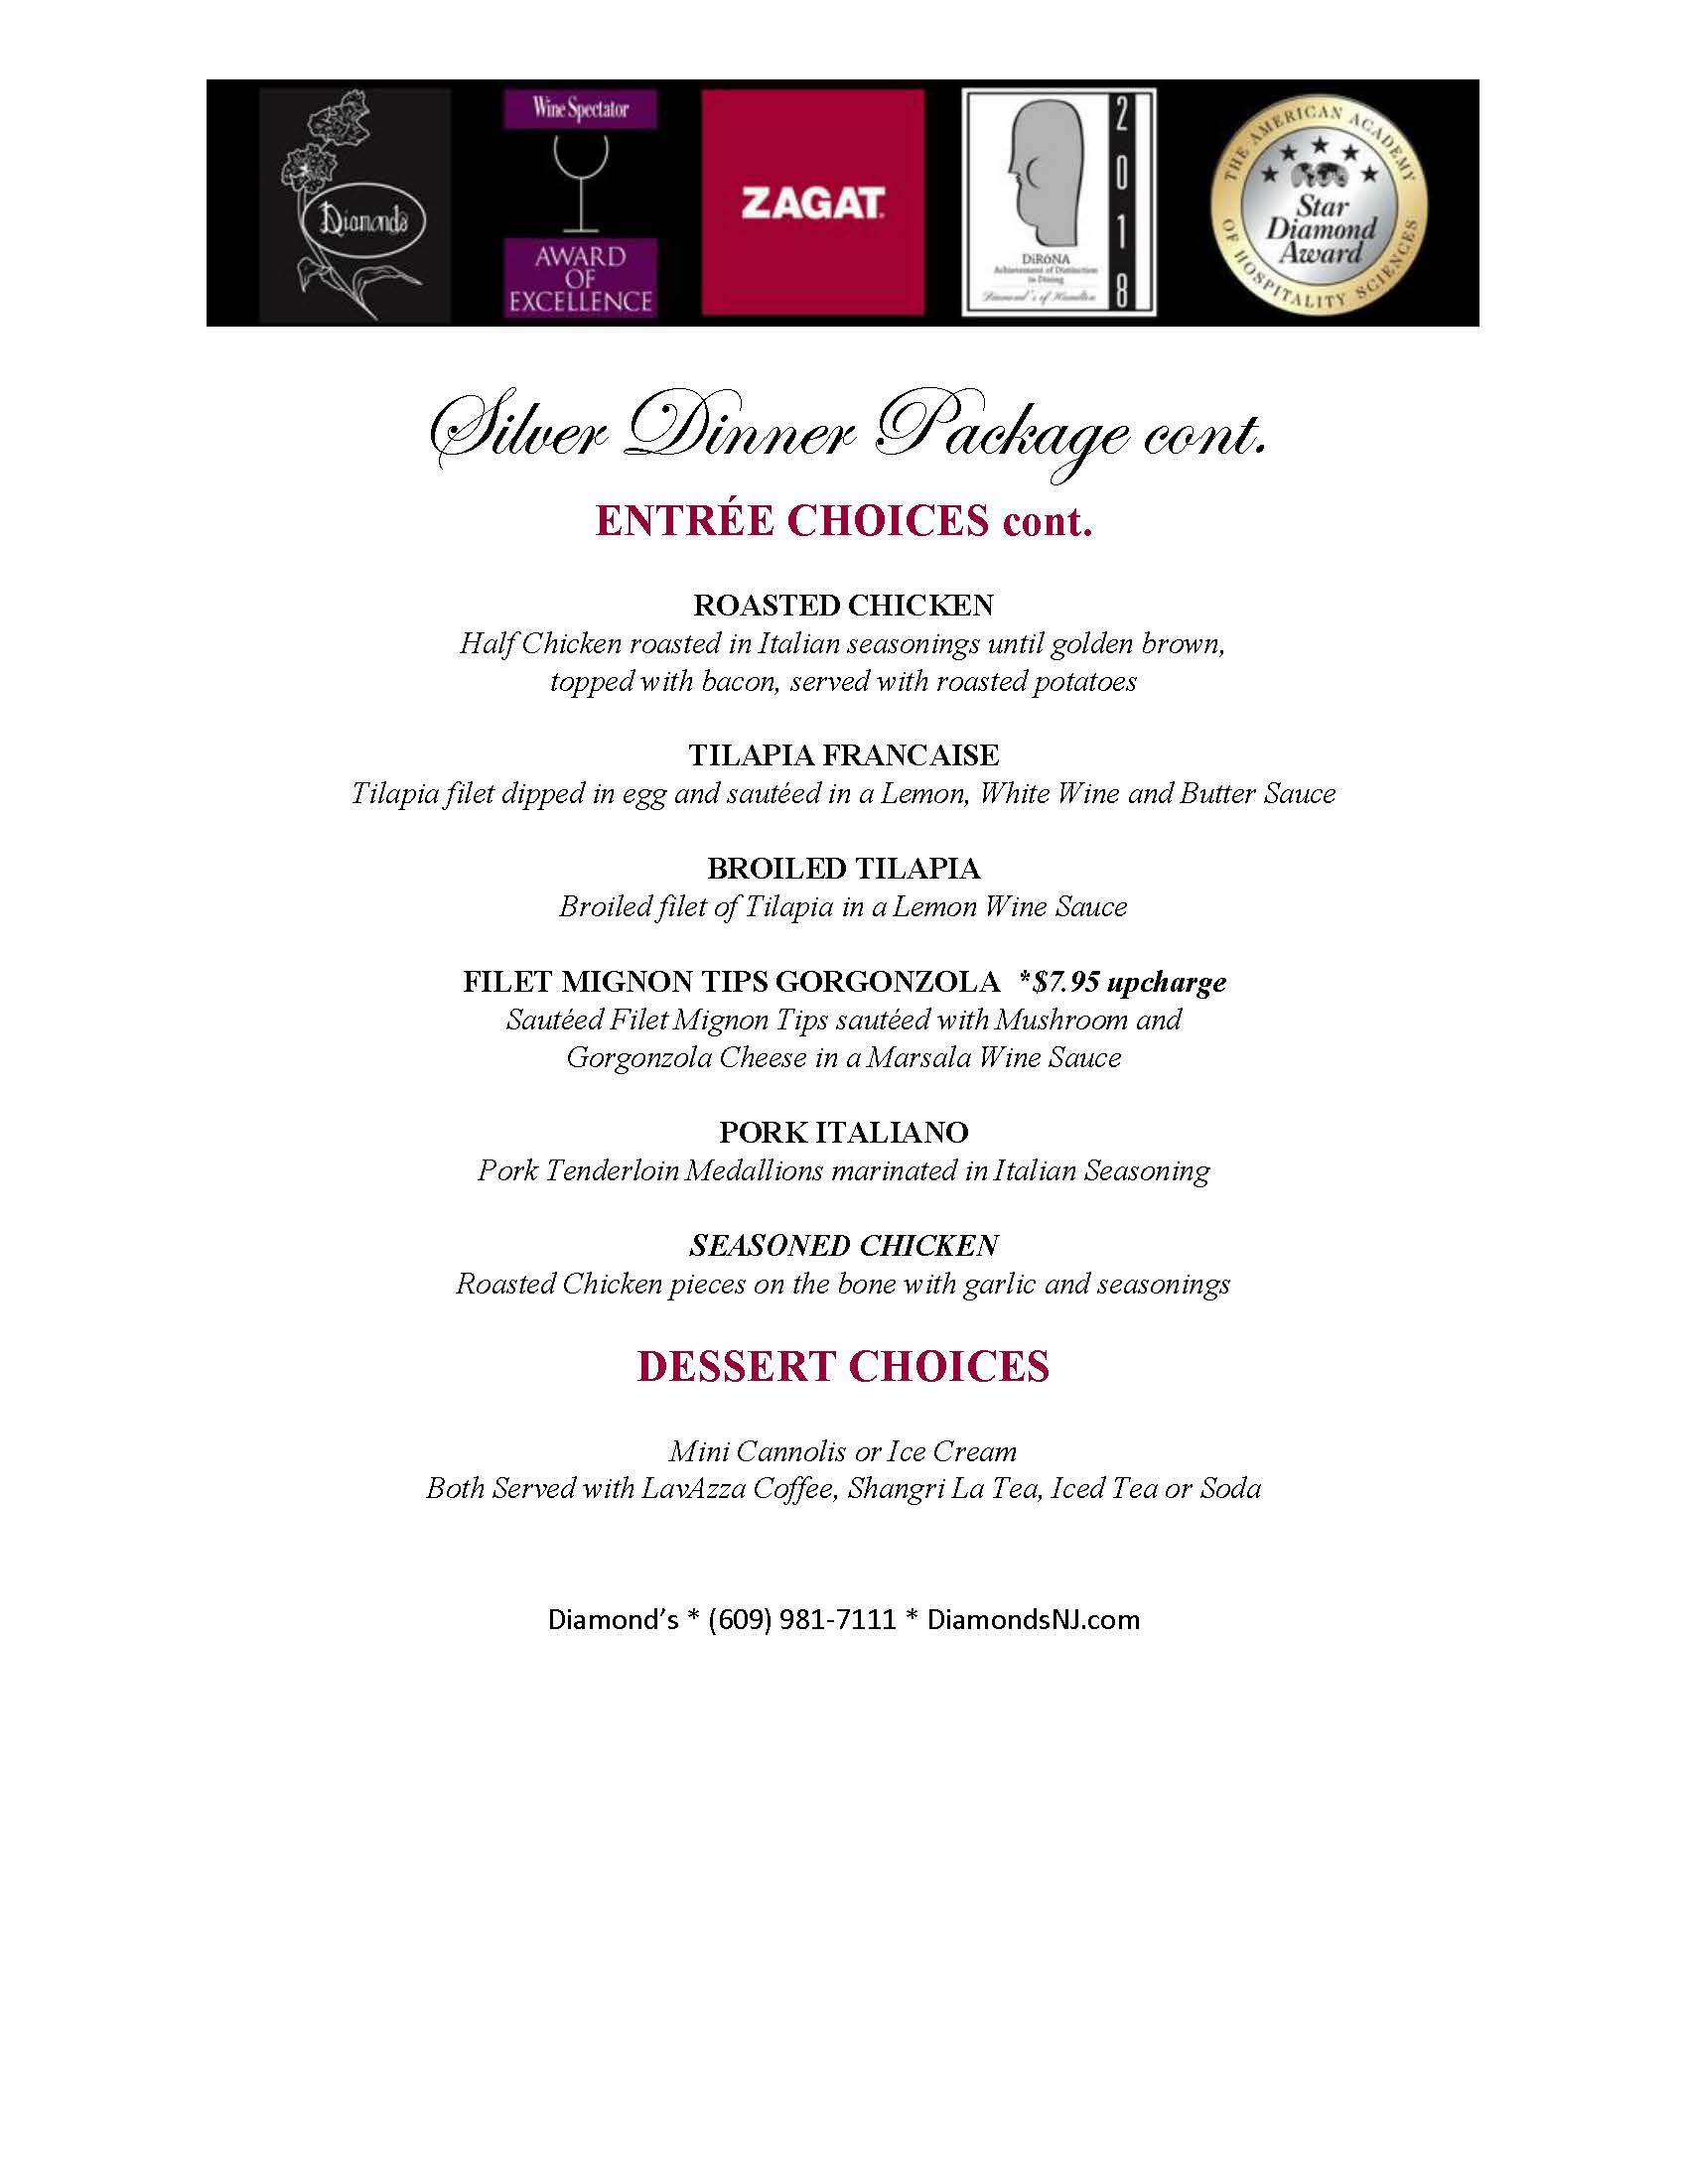 A flyer for a wine dinner package.